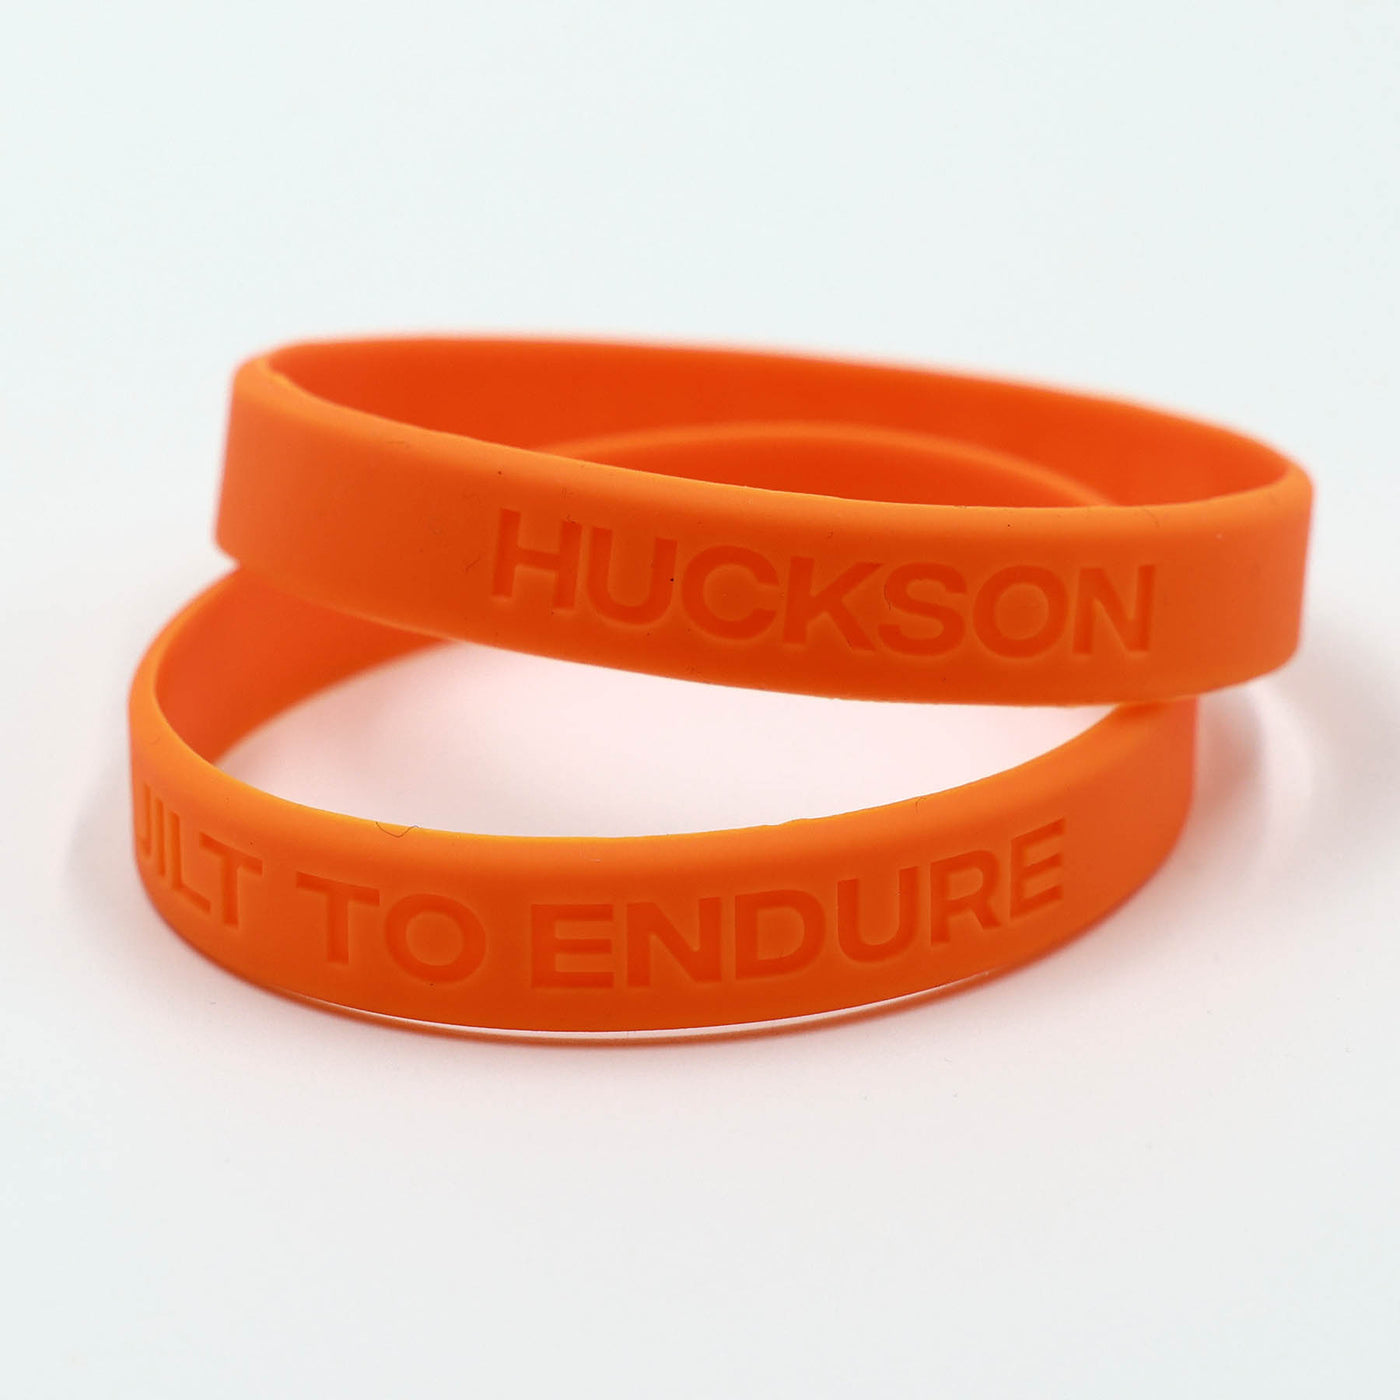 'Built to Endure' Silicone Rubber Wristband